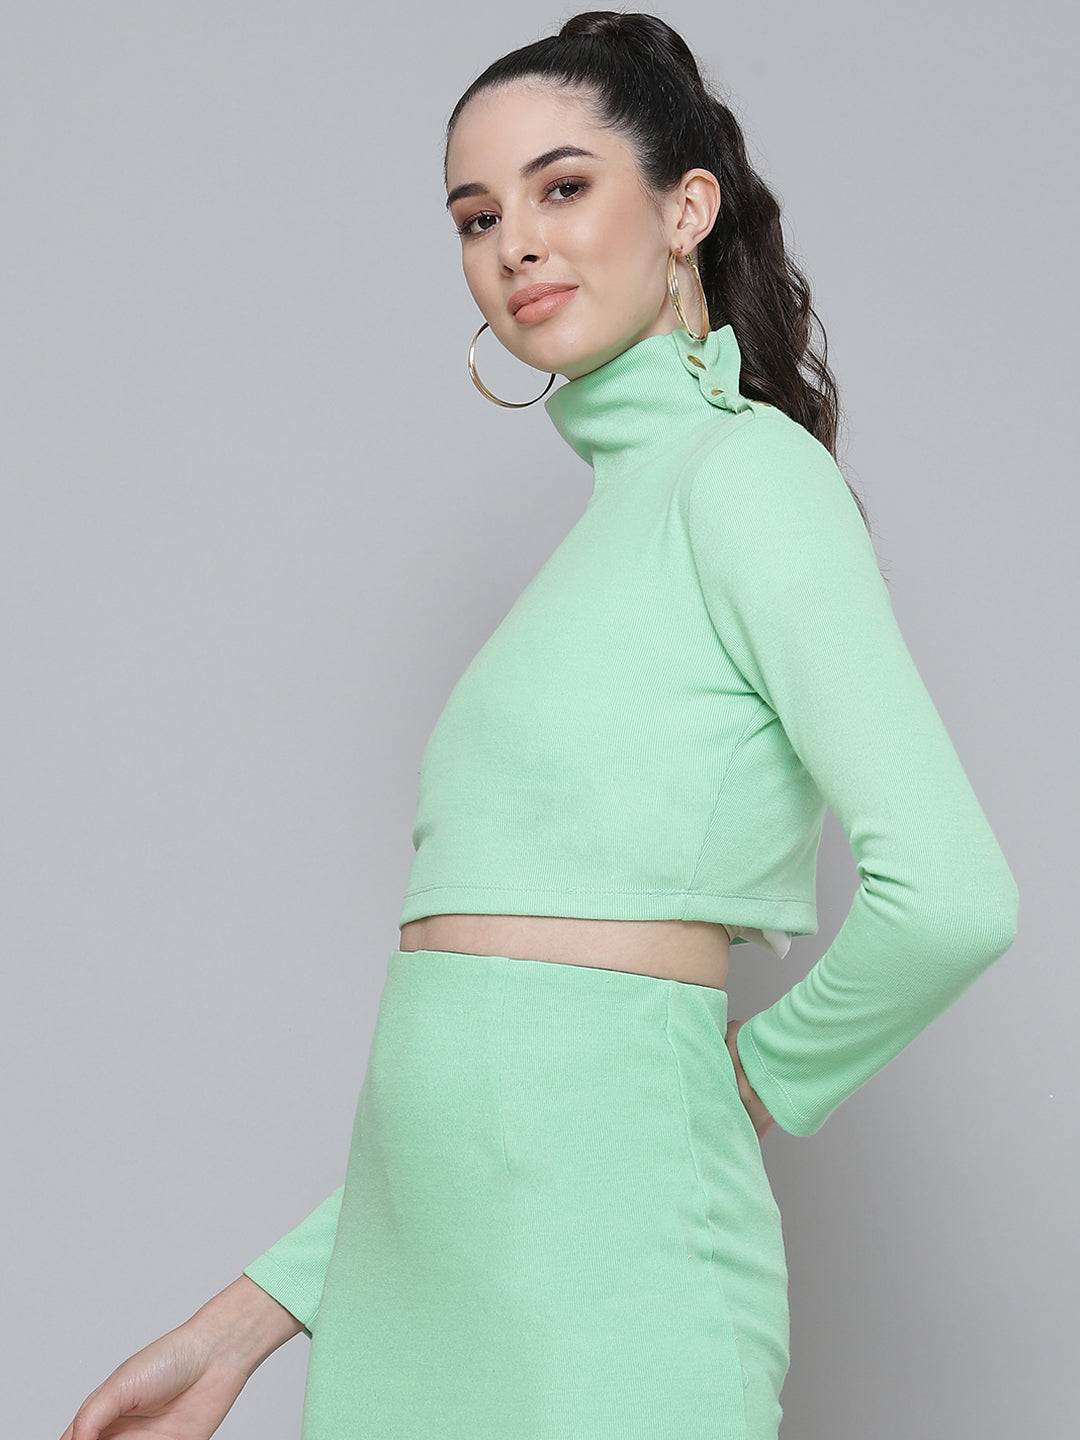 Mint Green Rib Turtle Buttoned Neck Crop Top